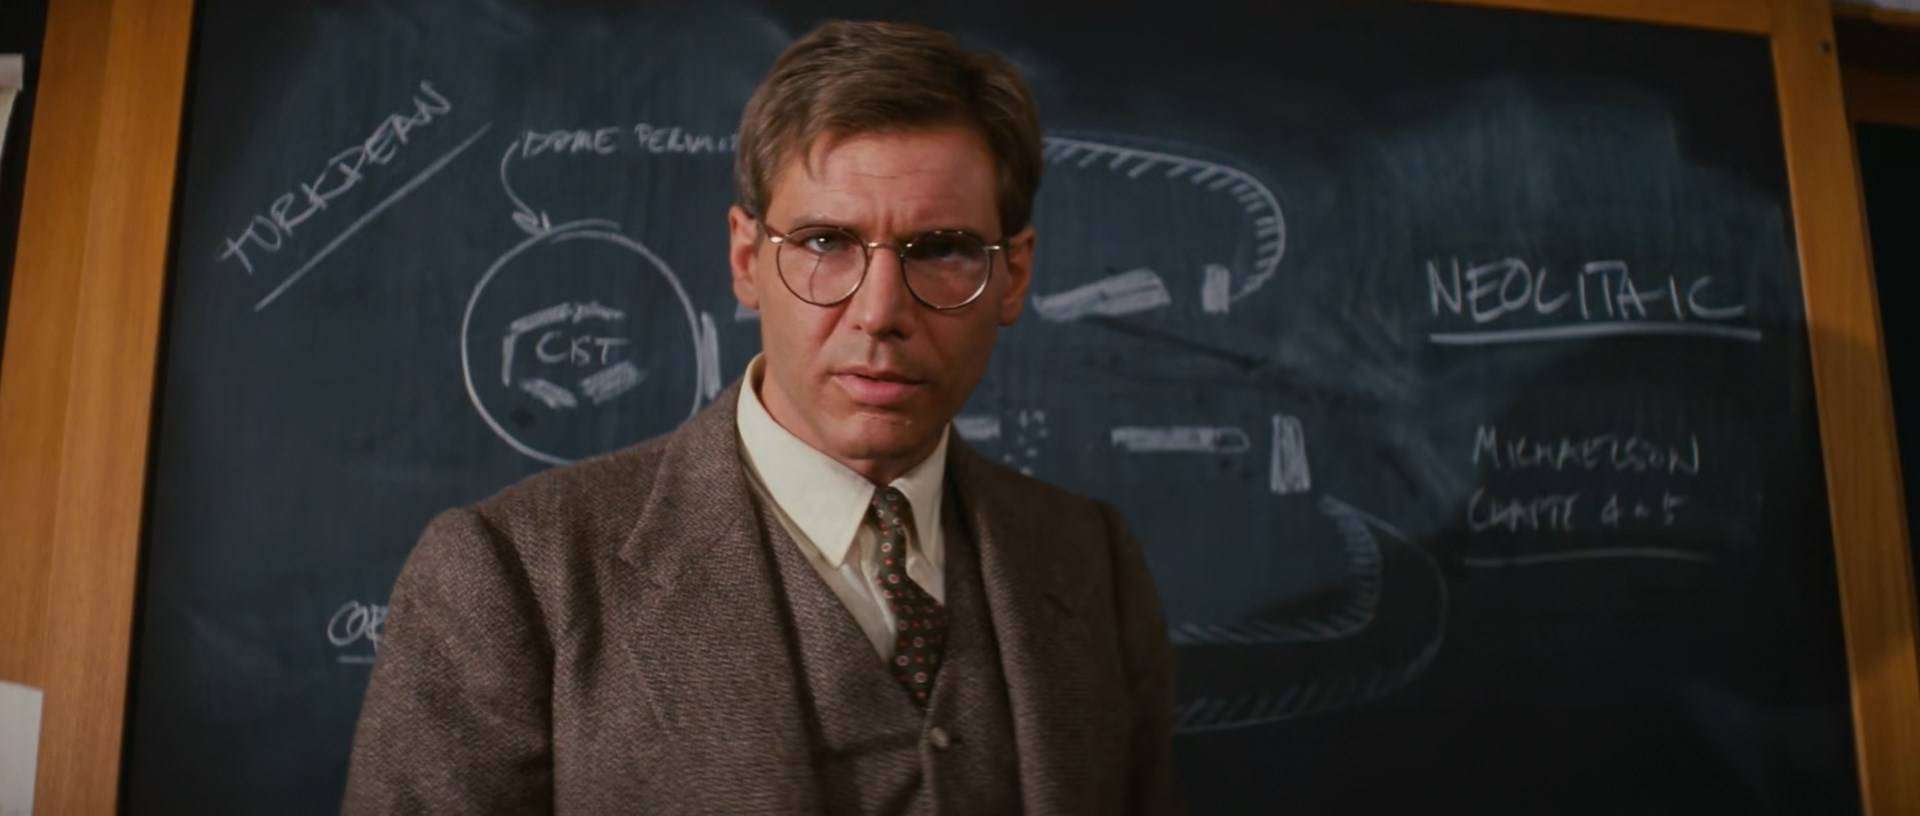 Harrison Ford in this image from Lucasfilm